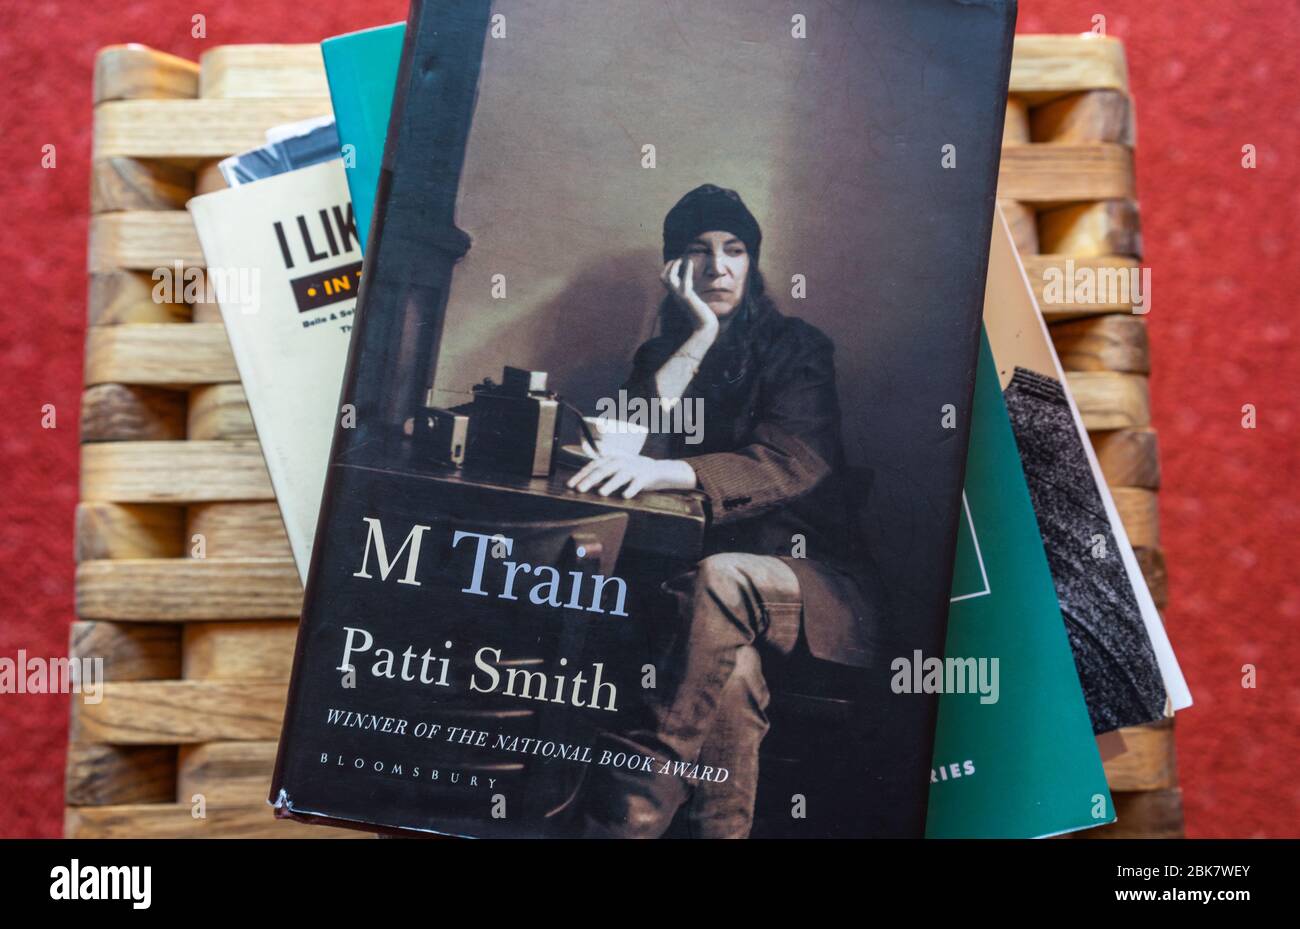 A copy of M Train a memoir by Patty Smith on top of a stack of books Stock Photo